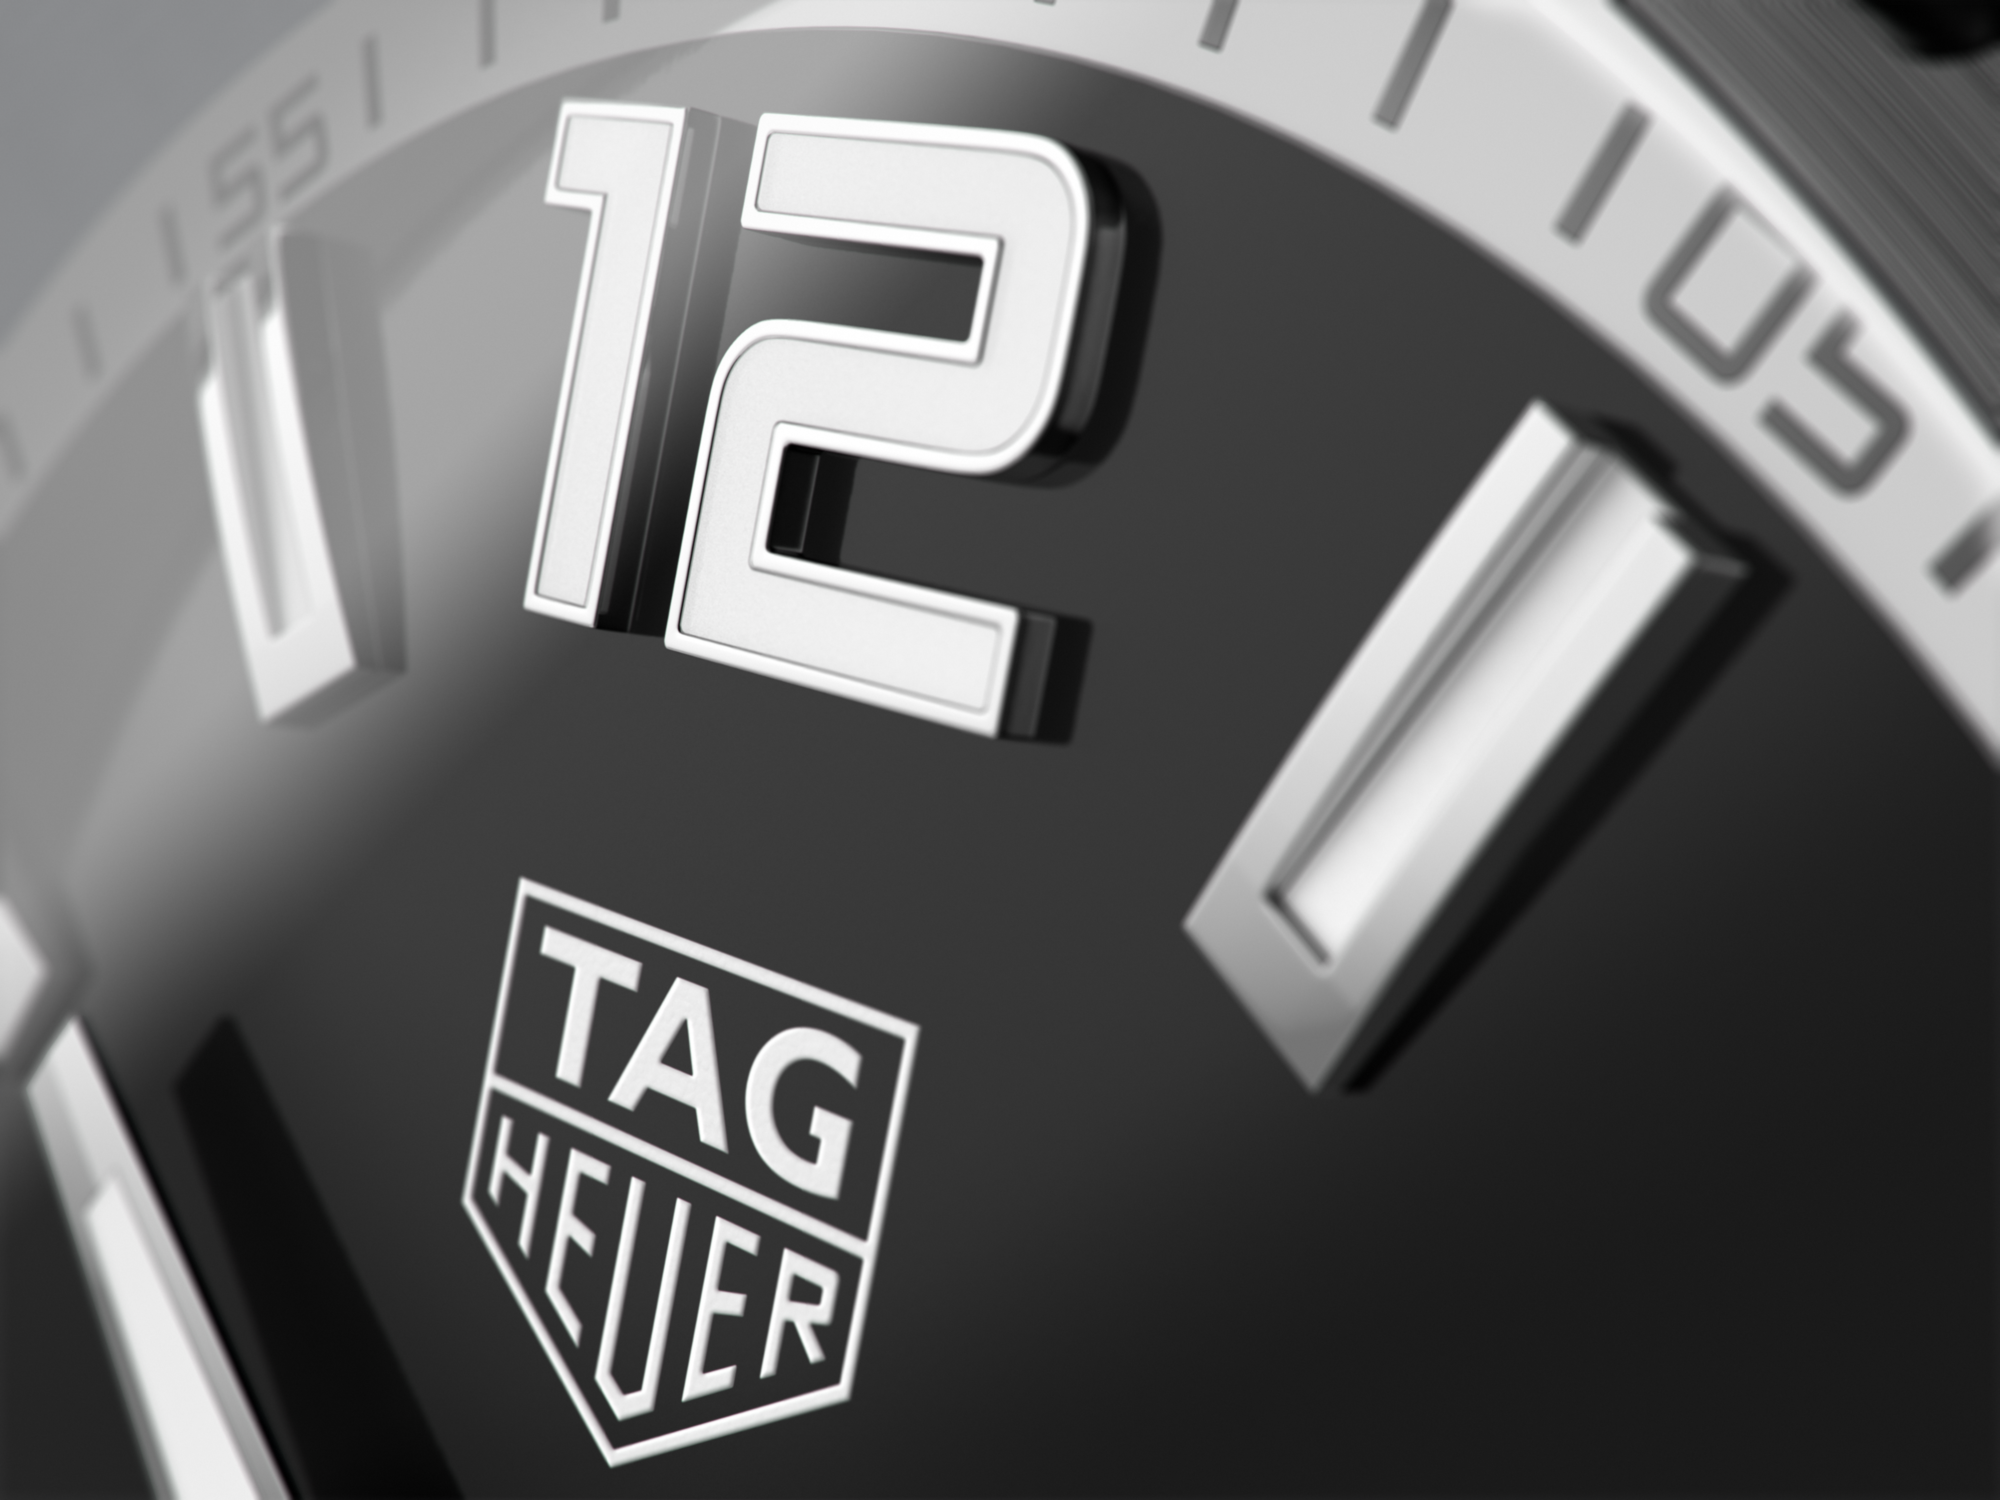 TAG Heuer Carrera Calibre Heuer 02 automatic Chronograph 42mm CBN2013. FC6483 brown leather